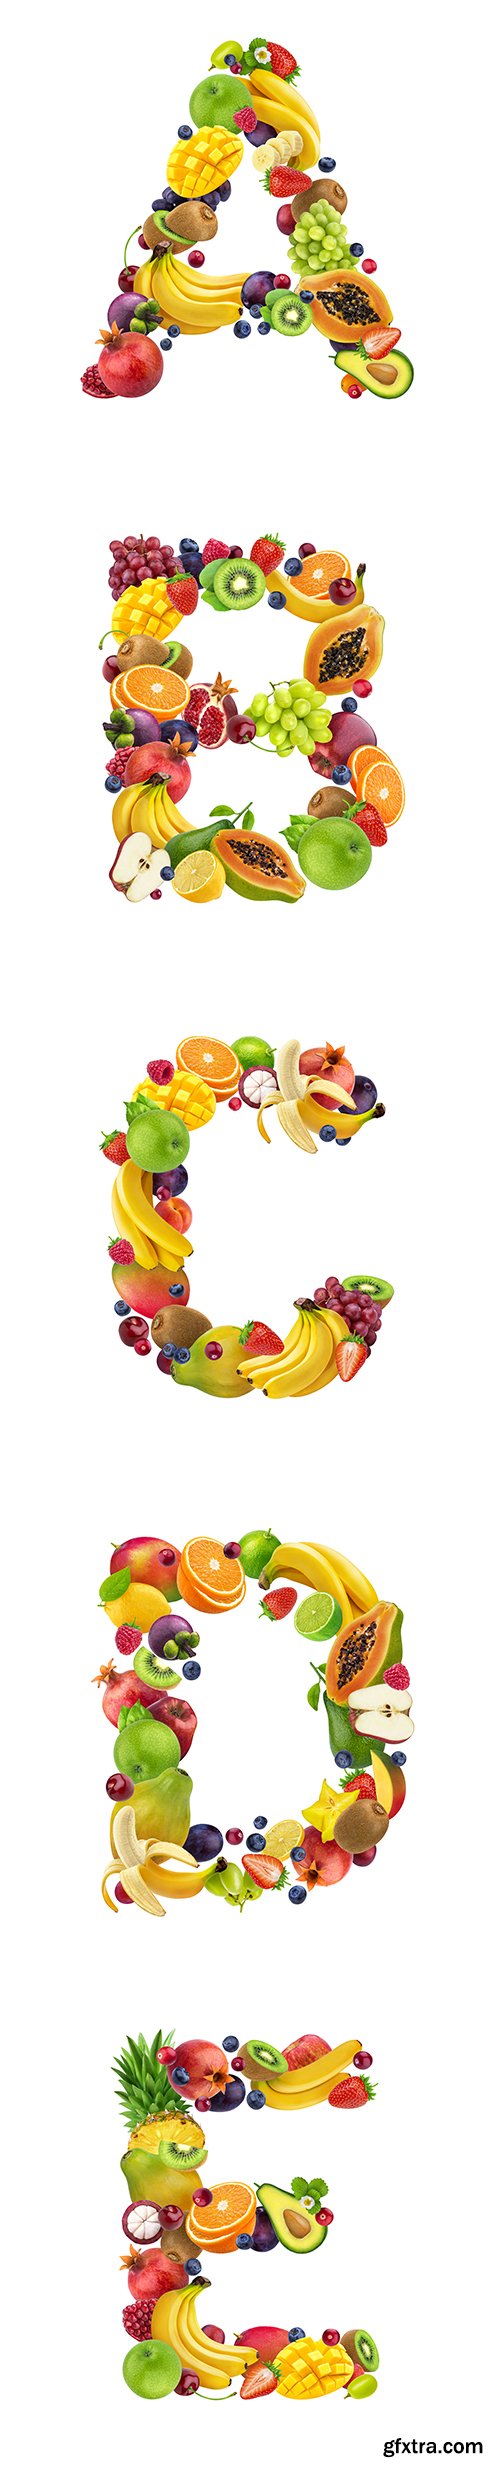 Fruits Letters Isolated - 26xJPGs